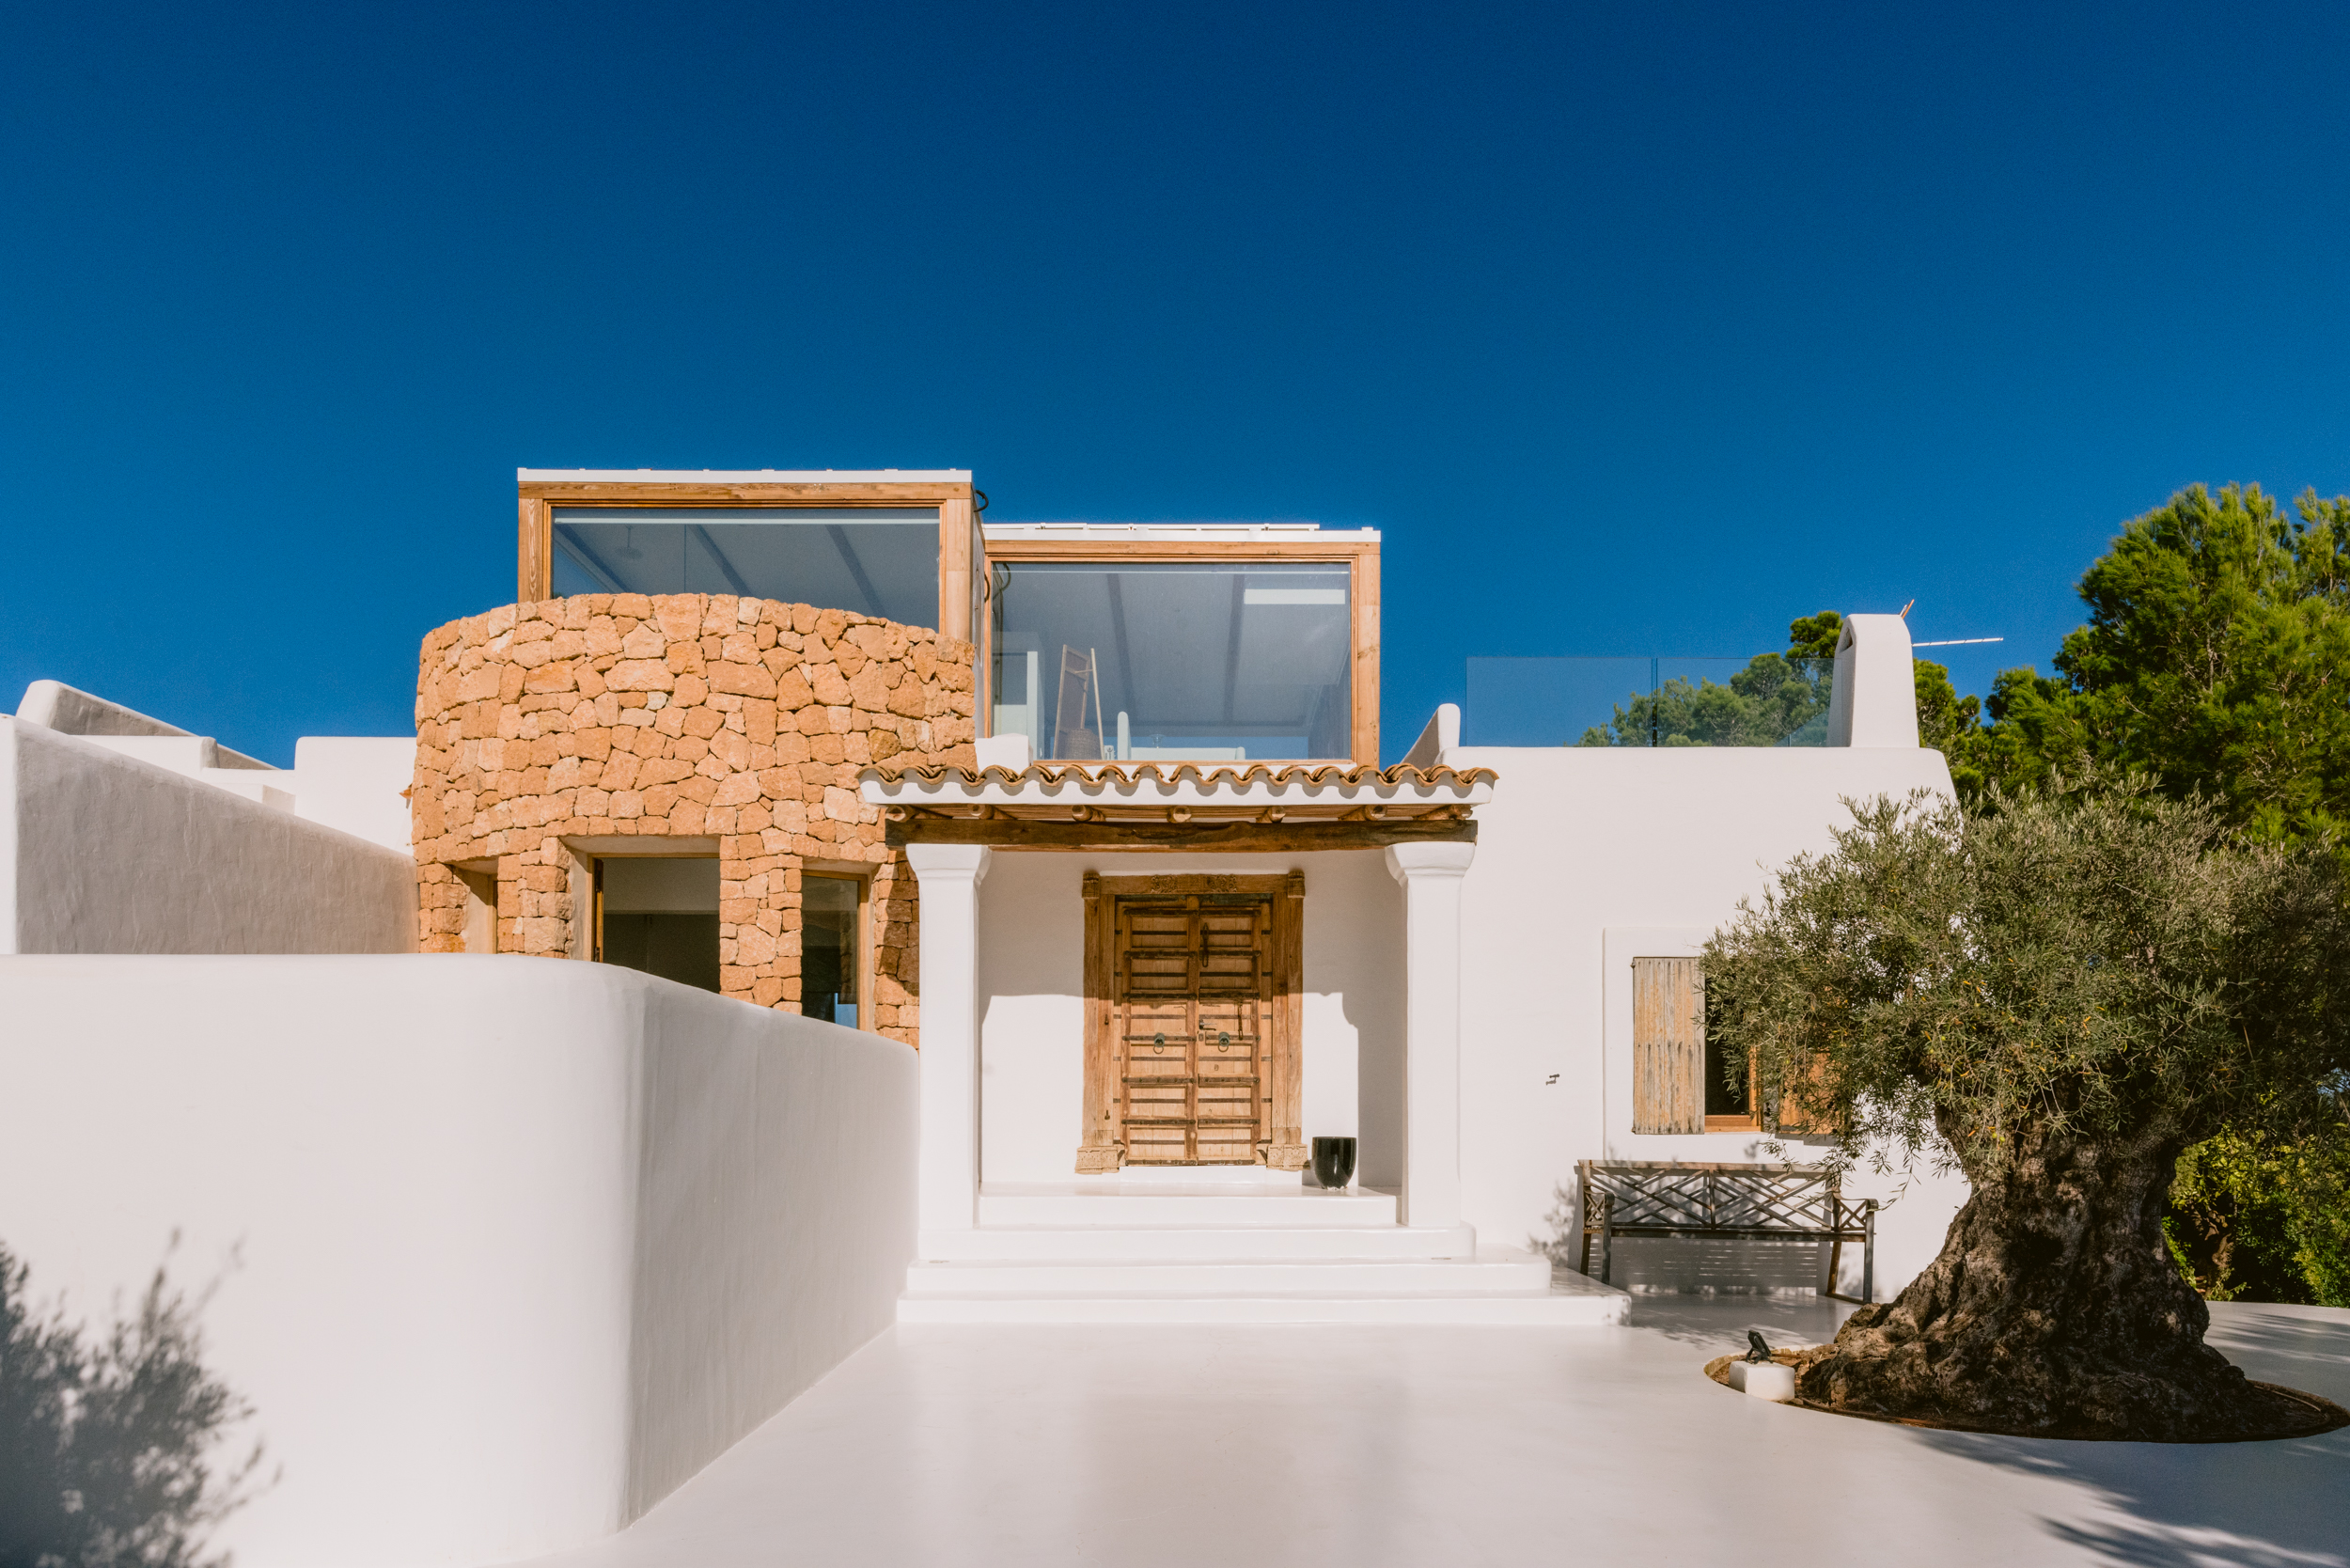 A curved honeycomb brick wall sits within the white cubic exterior of an Ibizan villa